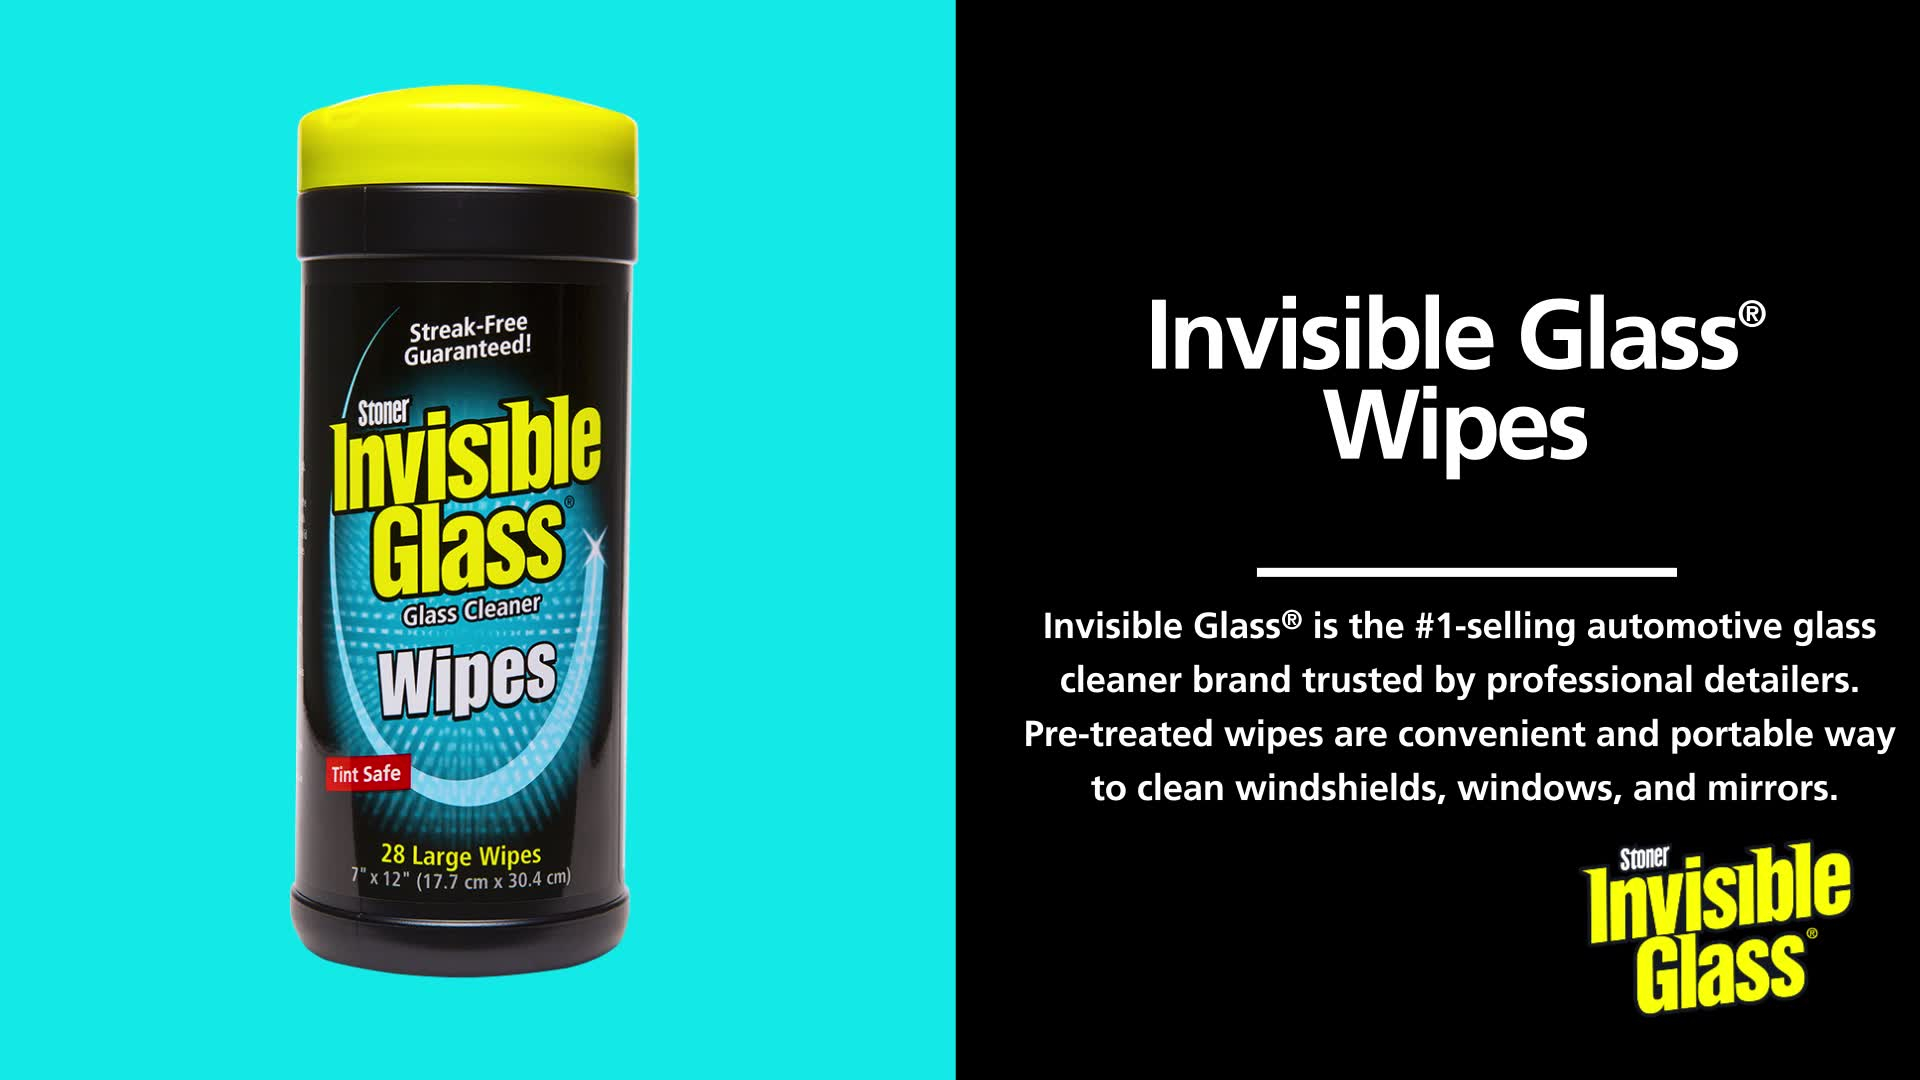 Invisible Glass Wipes Benefits